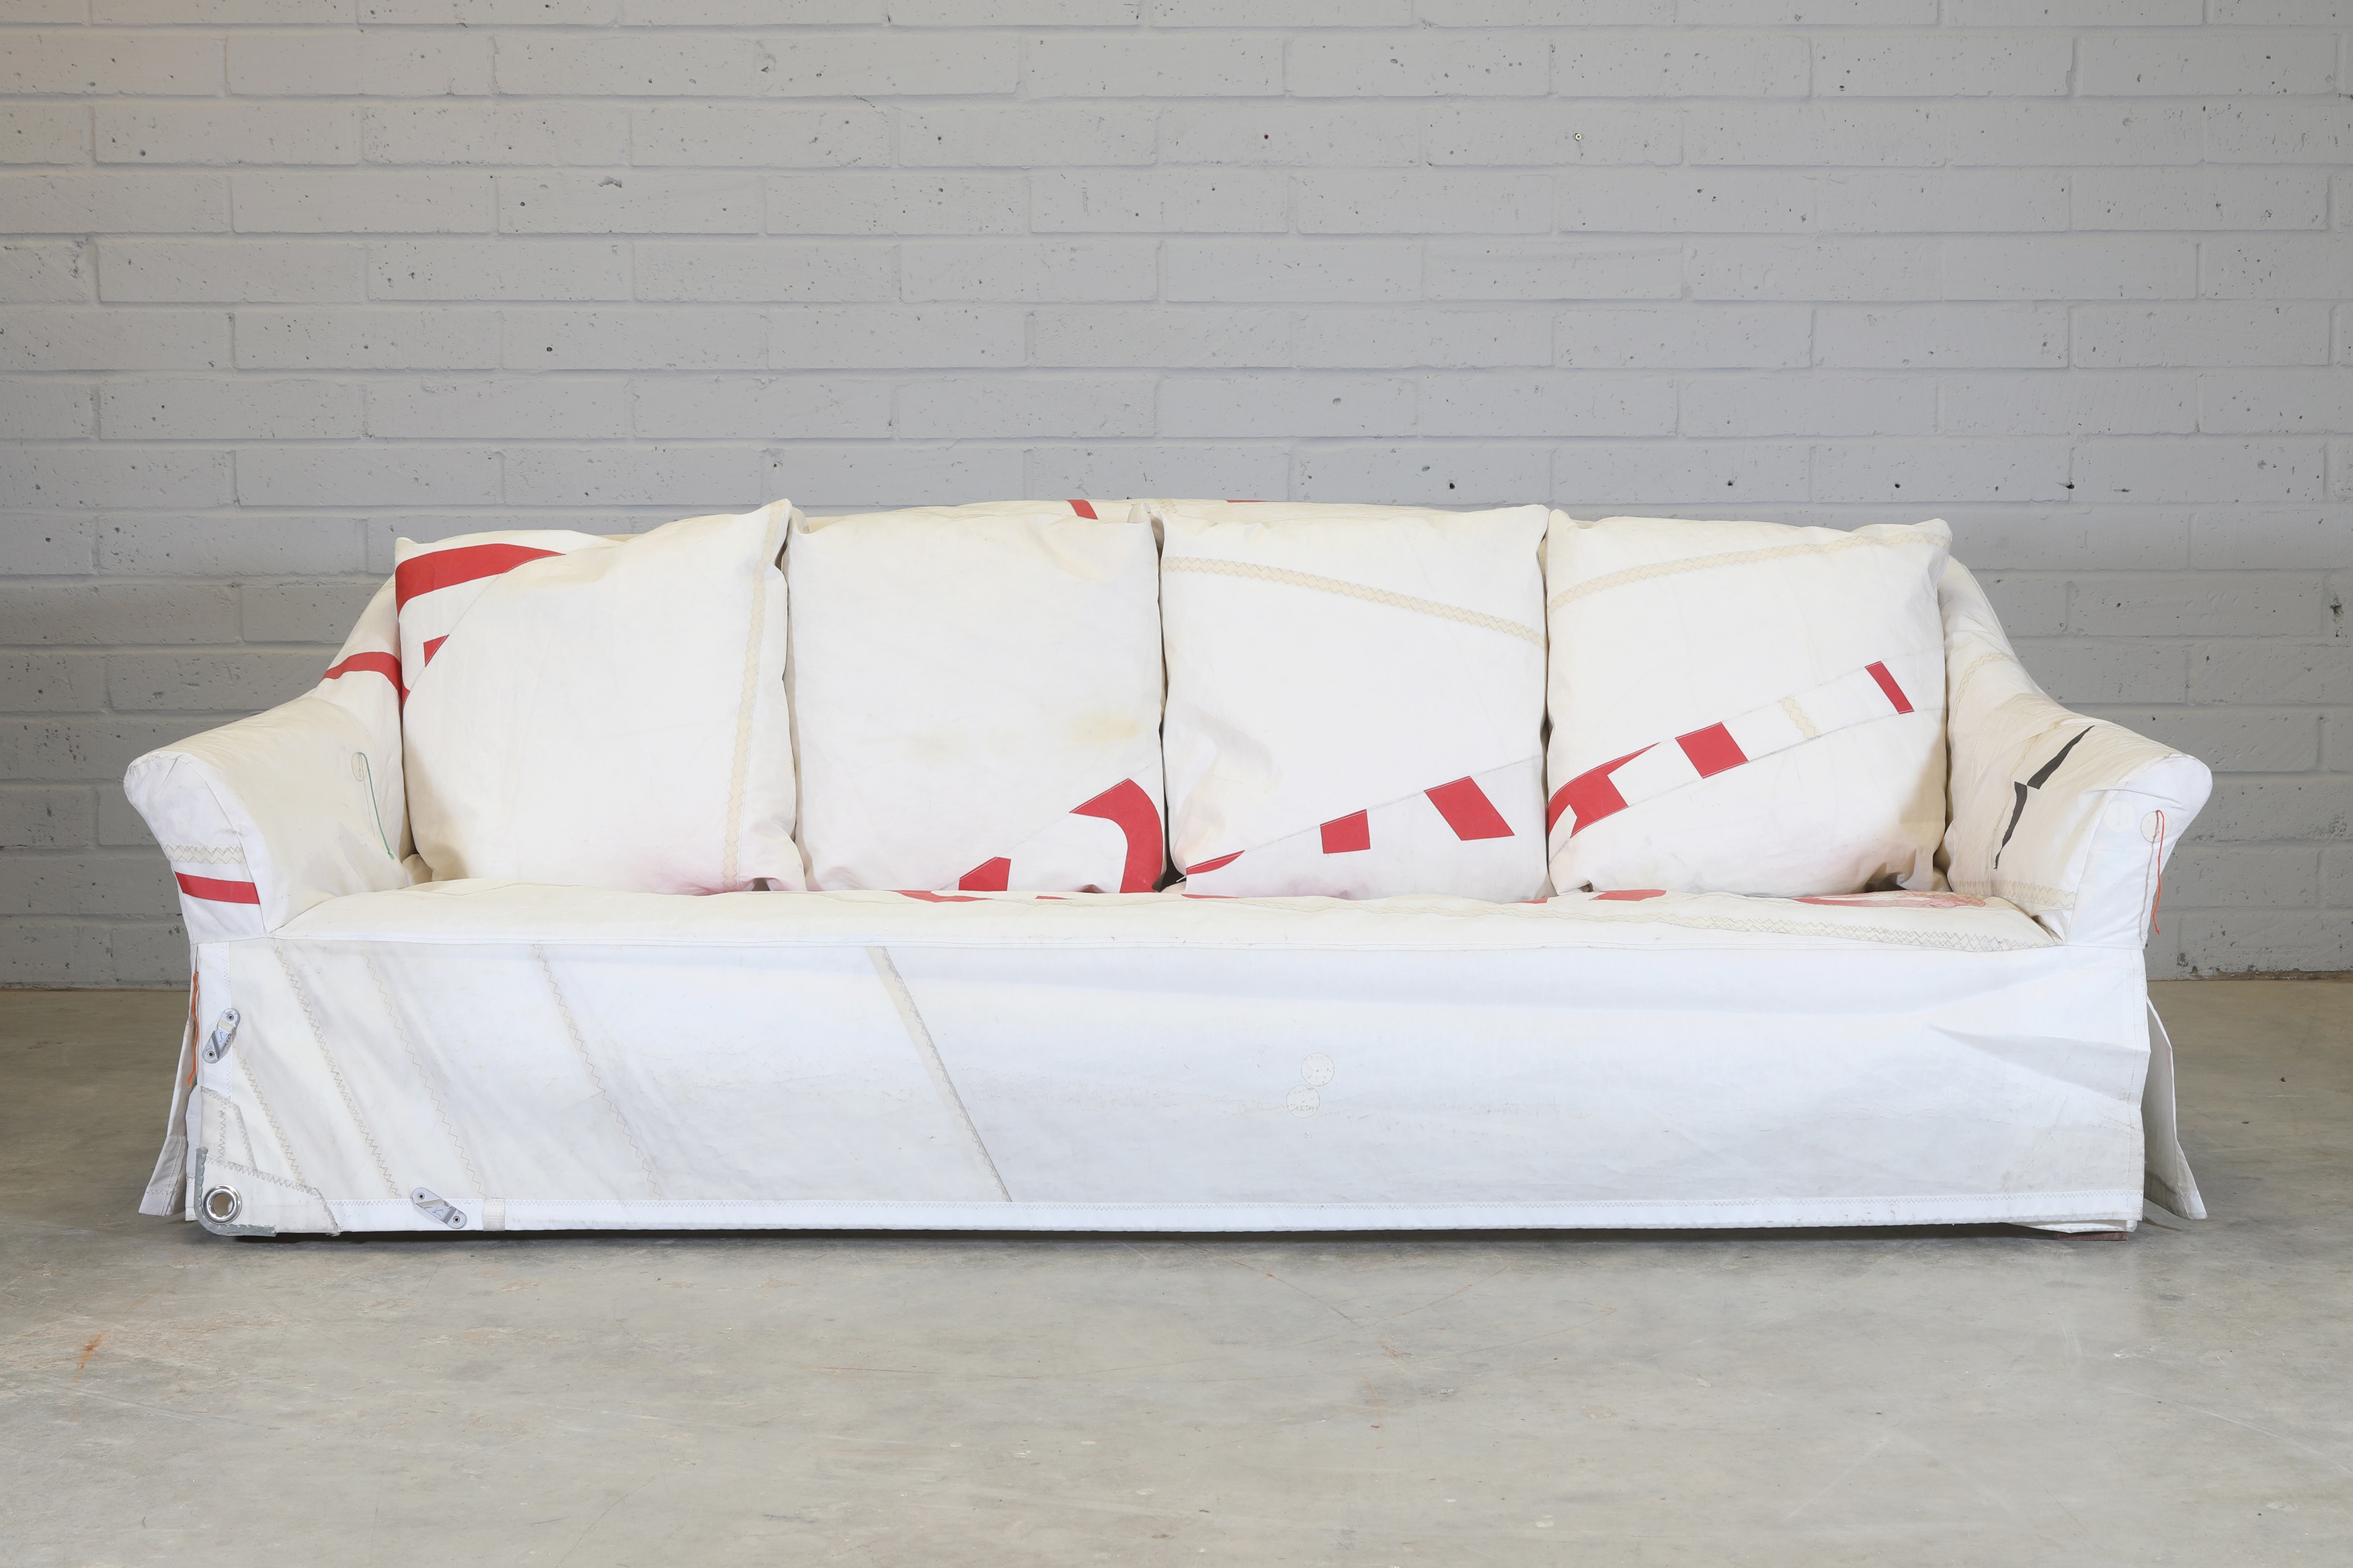 'For Sail', 2008, a unique 'Nikki' sofa upholstered in the reclaimed sail from a 470 regatta sailing dinghy (£800-1,200)